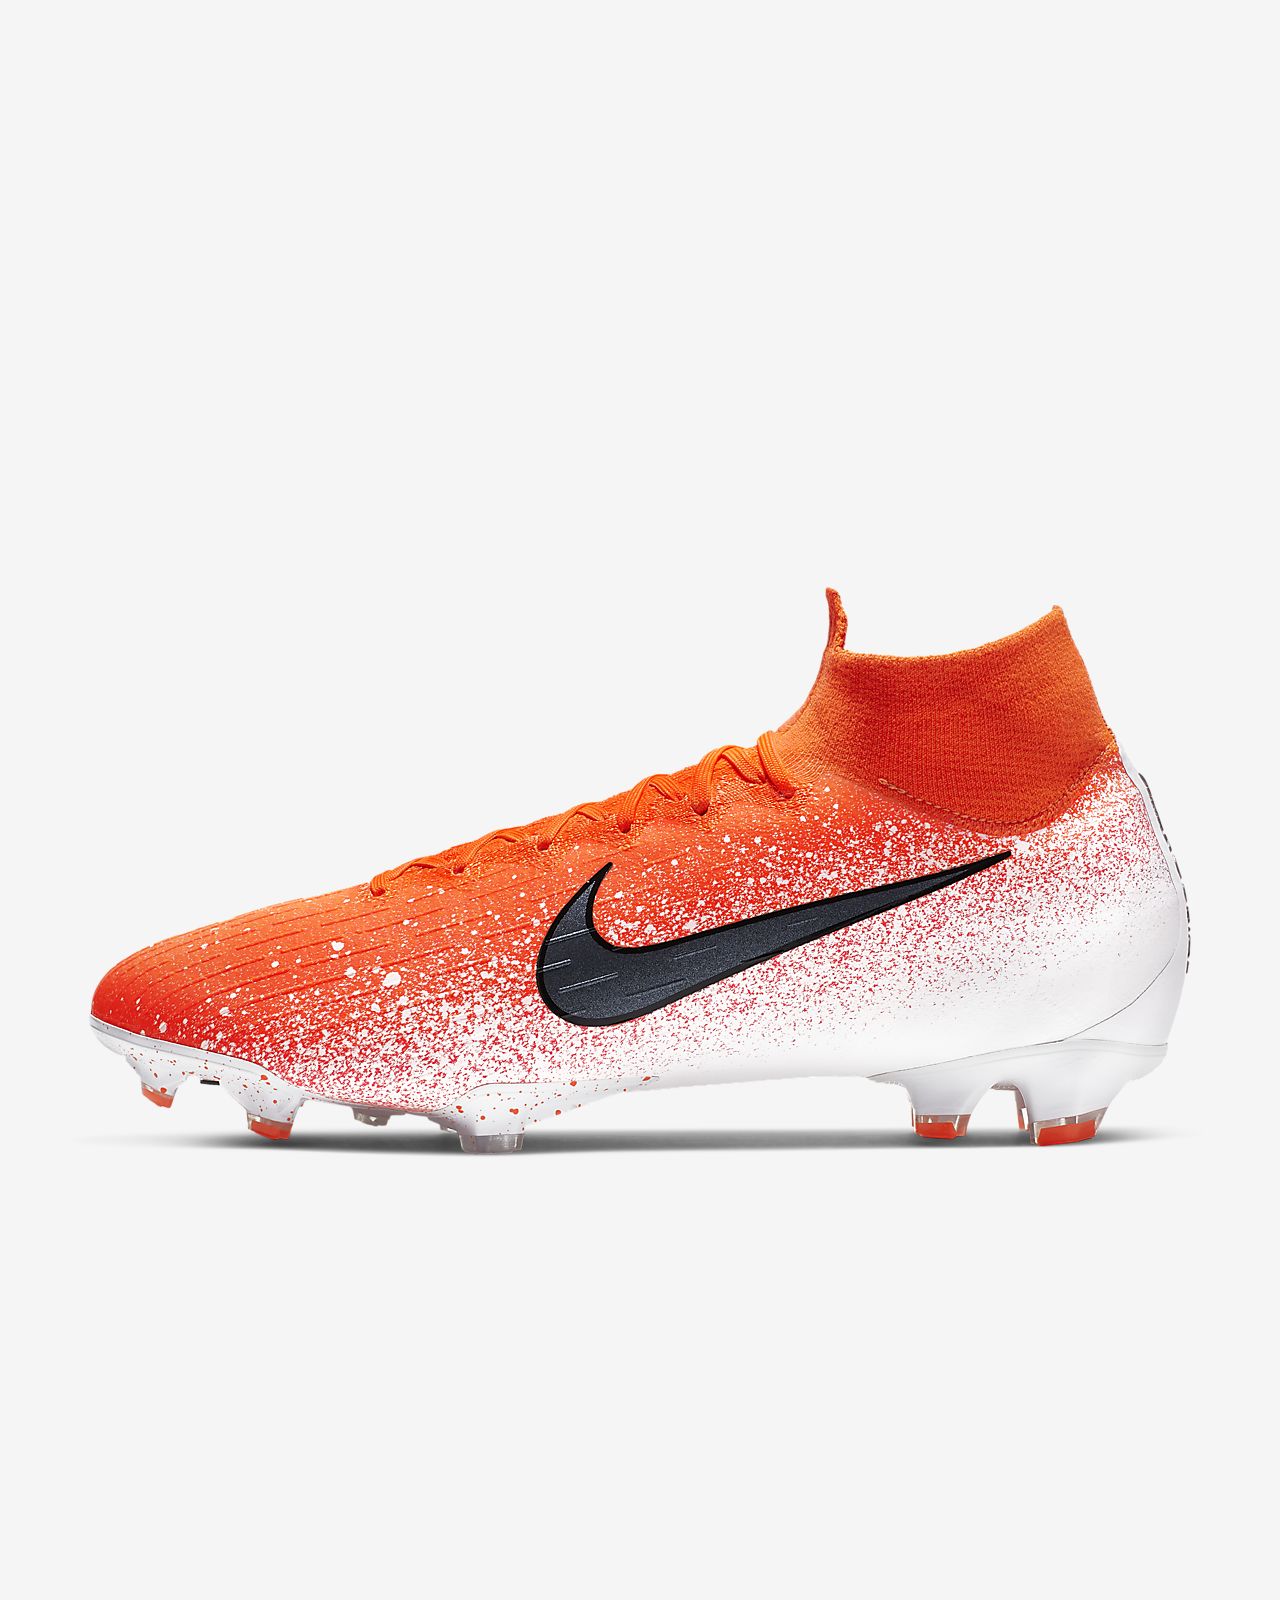 nike cr7 studs online india Sale,up to 